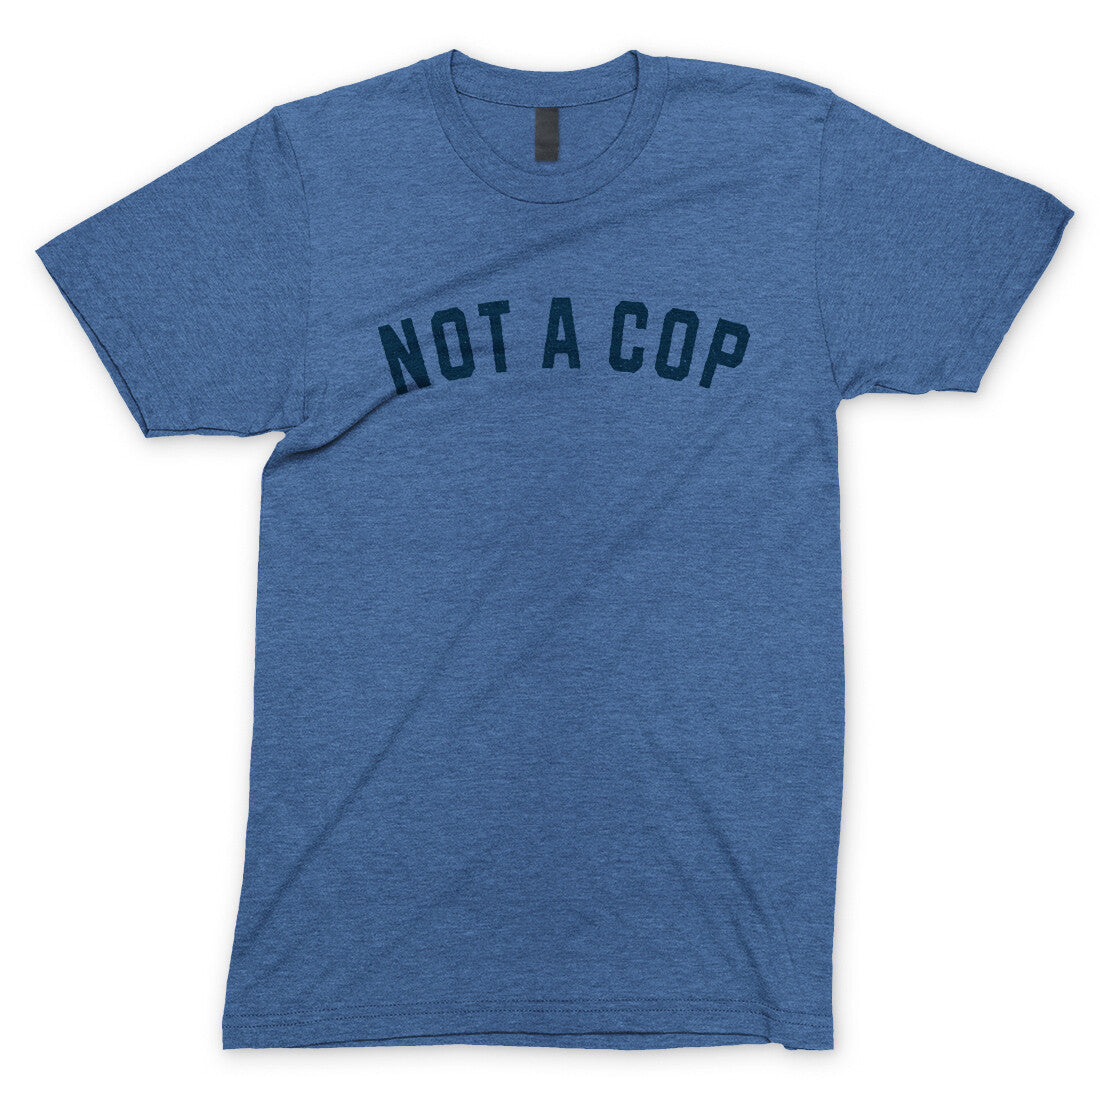 Not a Cop in Heather Royal Color